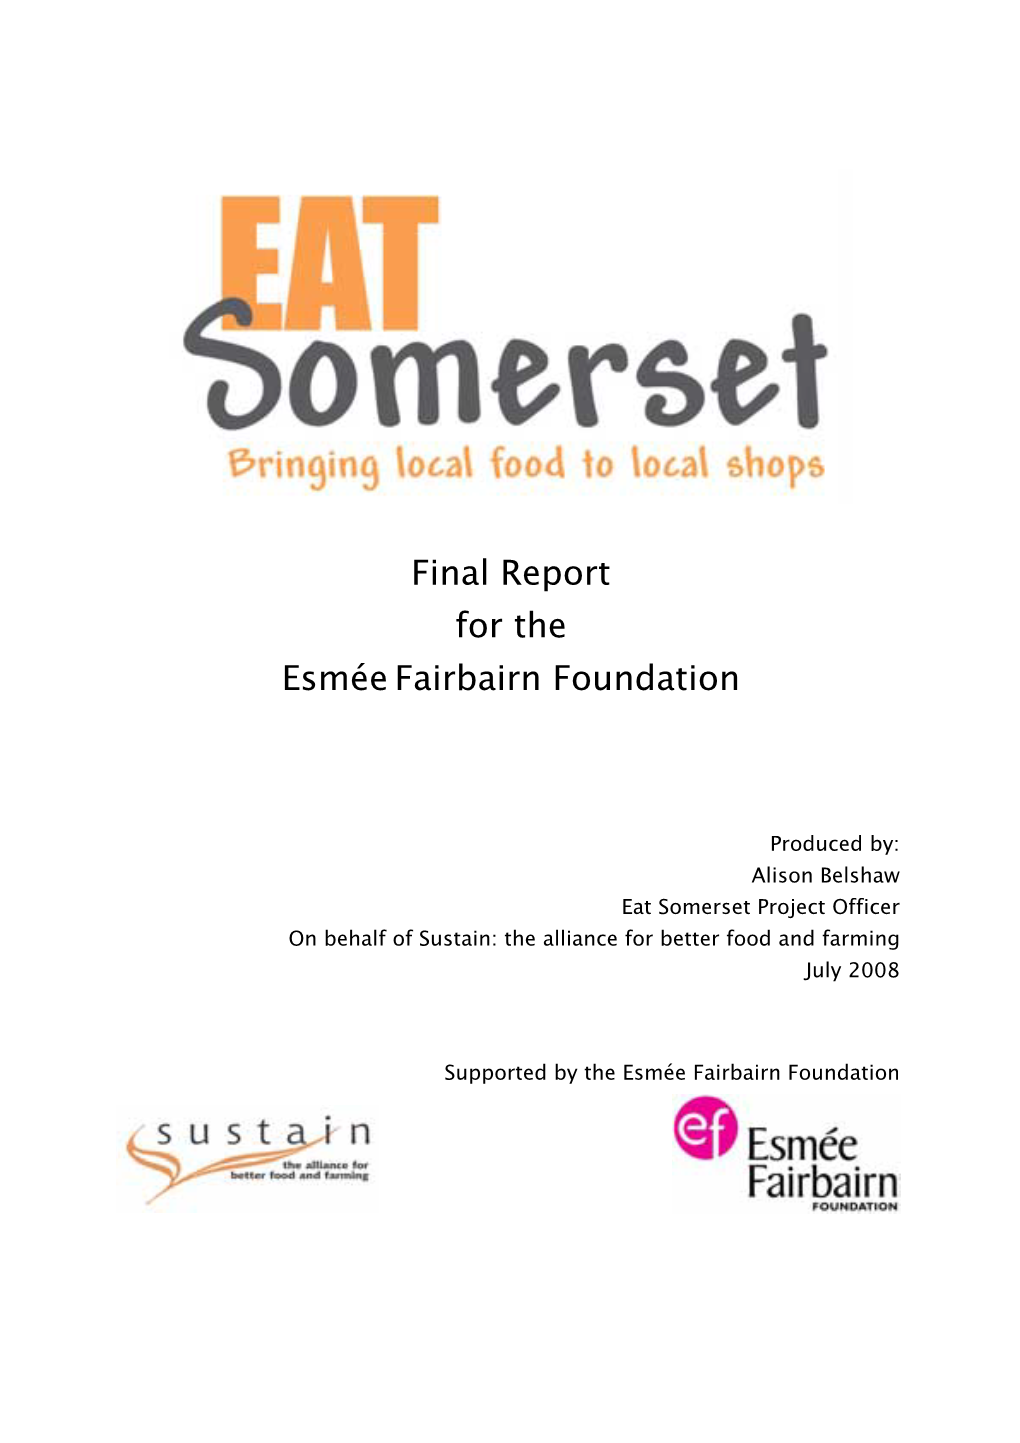 Final Report of the Eat Somerset Project for the Esmee Fairbairn